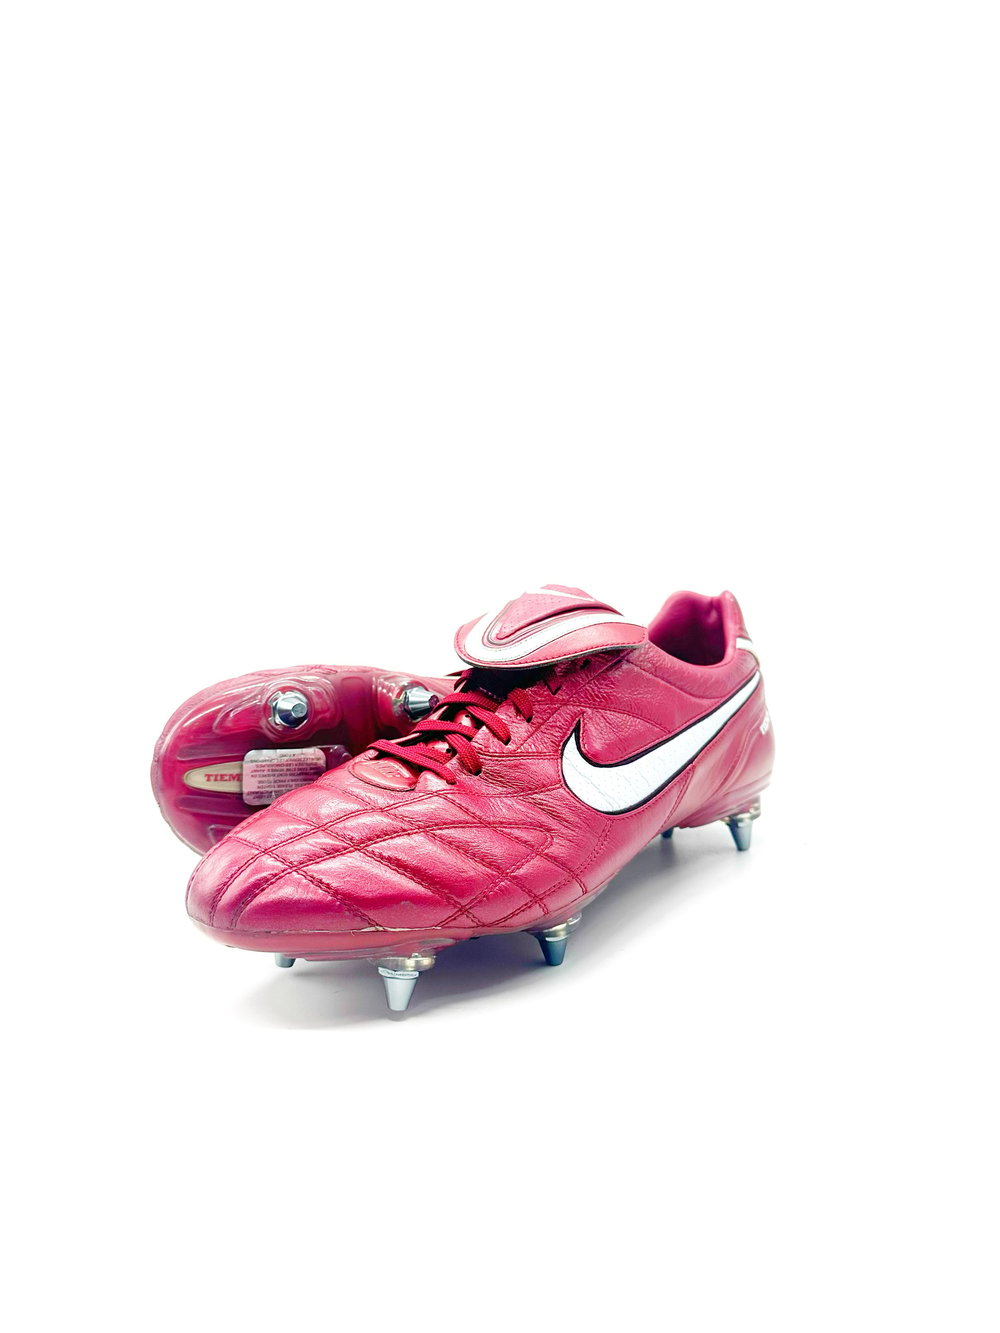 Image of Nike Tiempo III RED SG